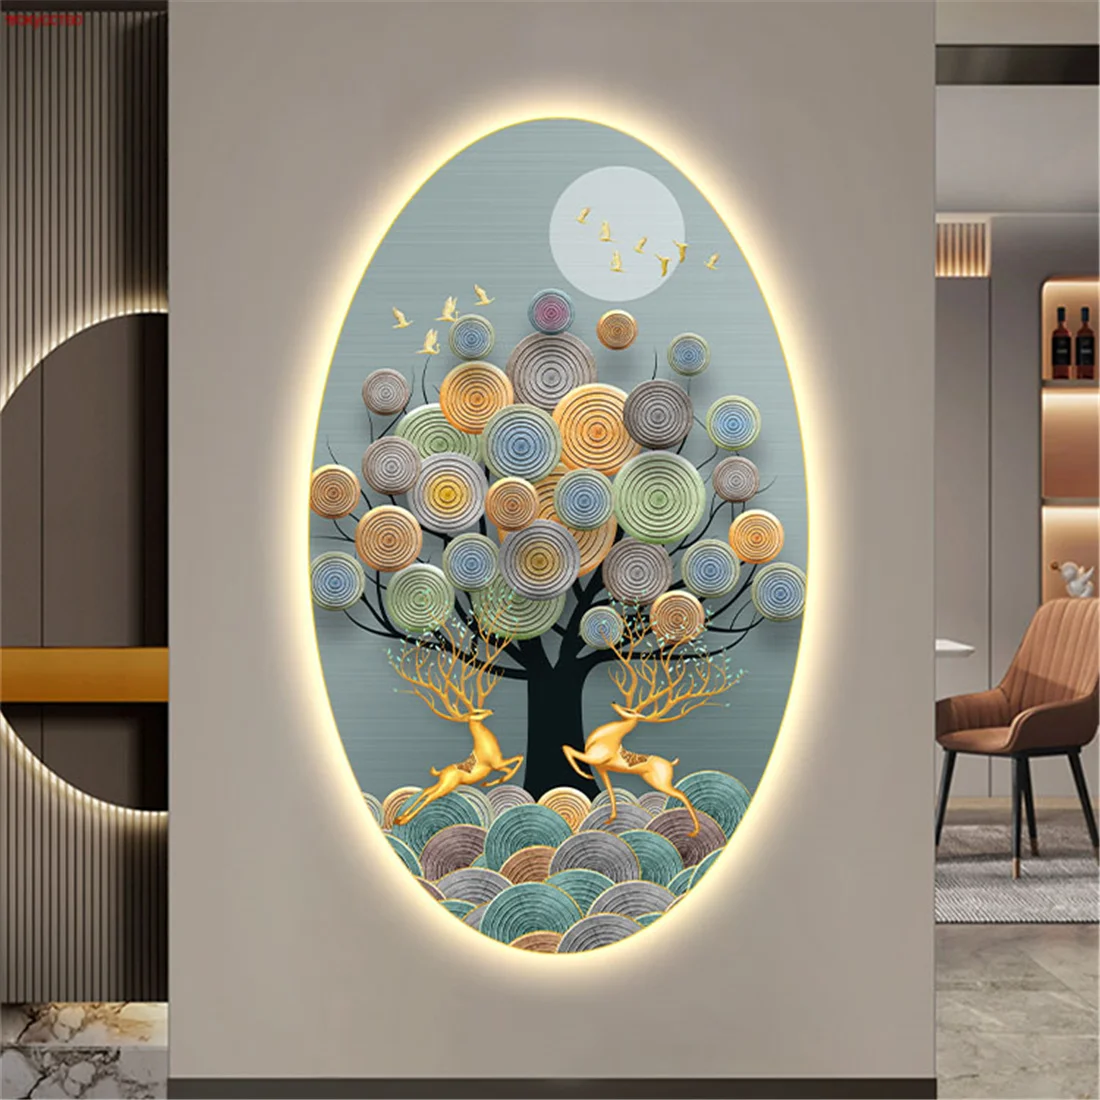 

Nordic Minimalism Oval Elk Mural Led Wall Lamp For Aisle Corridor Living Room Background Study Home Decoration Sconce Art Lights